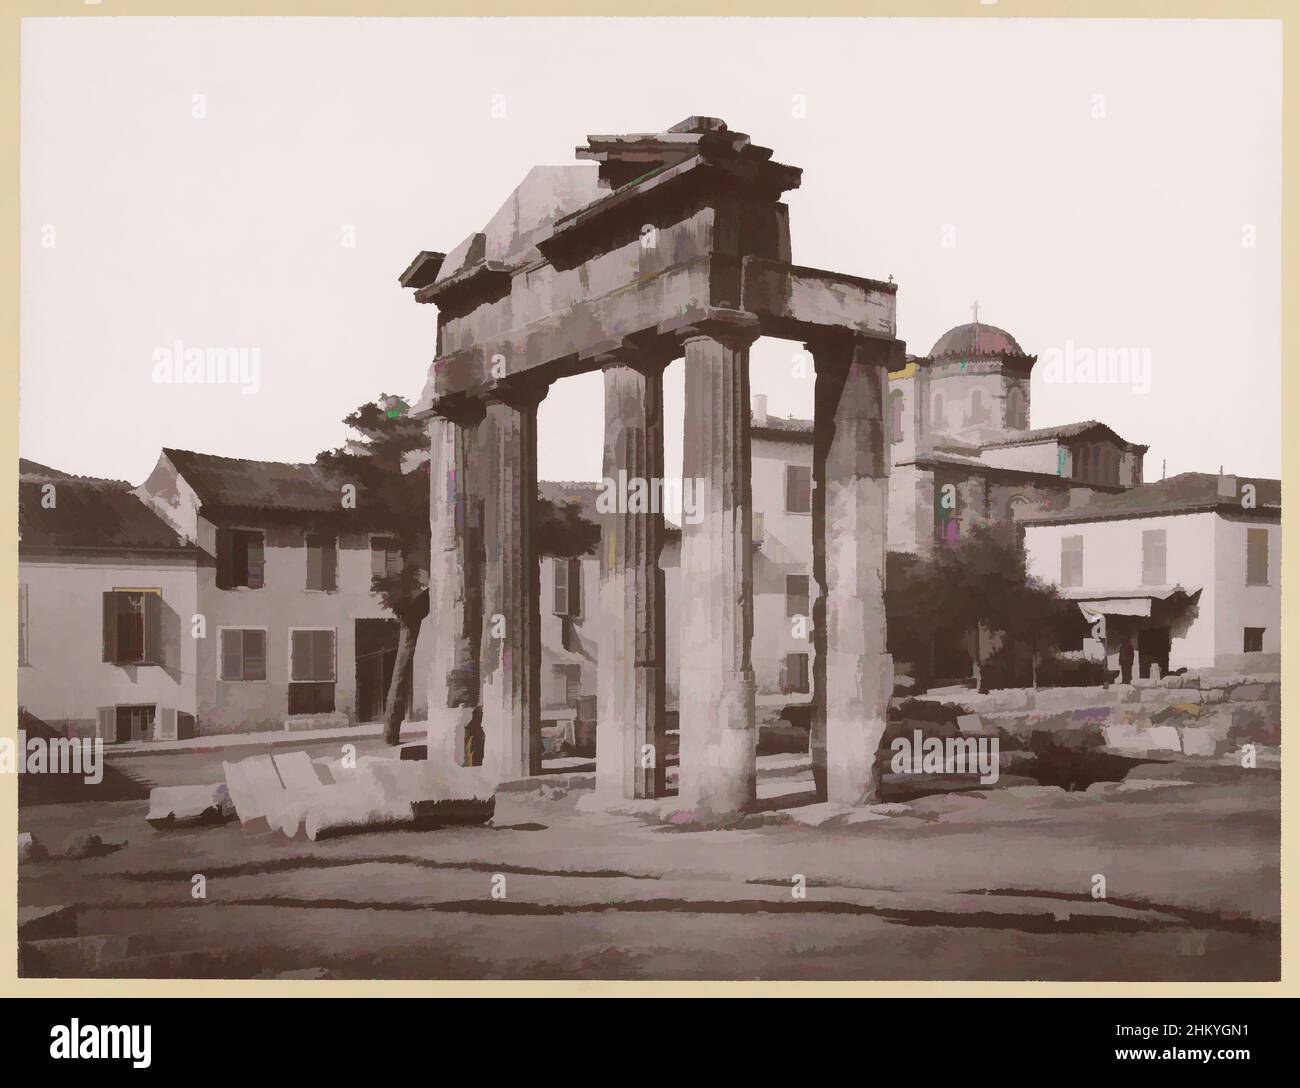 Art inspired by Agora in Athens, G. 20. Agora (The Oil Market). Athens., Greece (series title), The photograph is part of Richard Polak's collected collection of photographs of Greece., Athene, c. 1895 - c. 1915, photographic support, paper, collotype, height 228 mm × width 291 mmheight, Classic works modernized by Artotop with a splash of modernity. Shapes, color and value, eye-catching visual impact on art. Emotions through freedom of artworks in a contemporary way. A timeless message pursuing a wildly creative new direction. Artists turning to the digital medium and creating the Artotop NFT Stock Photo